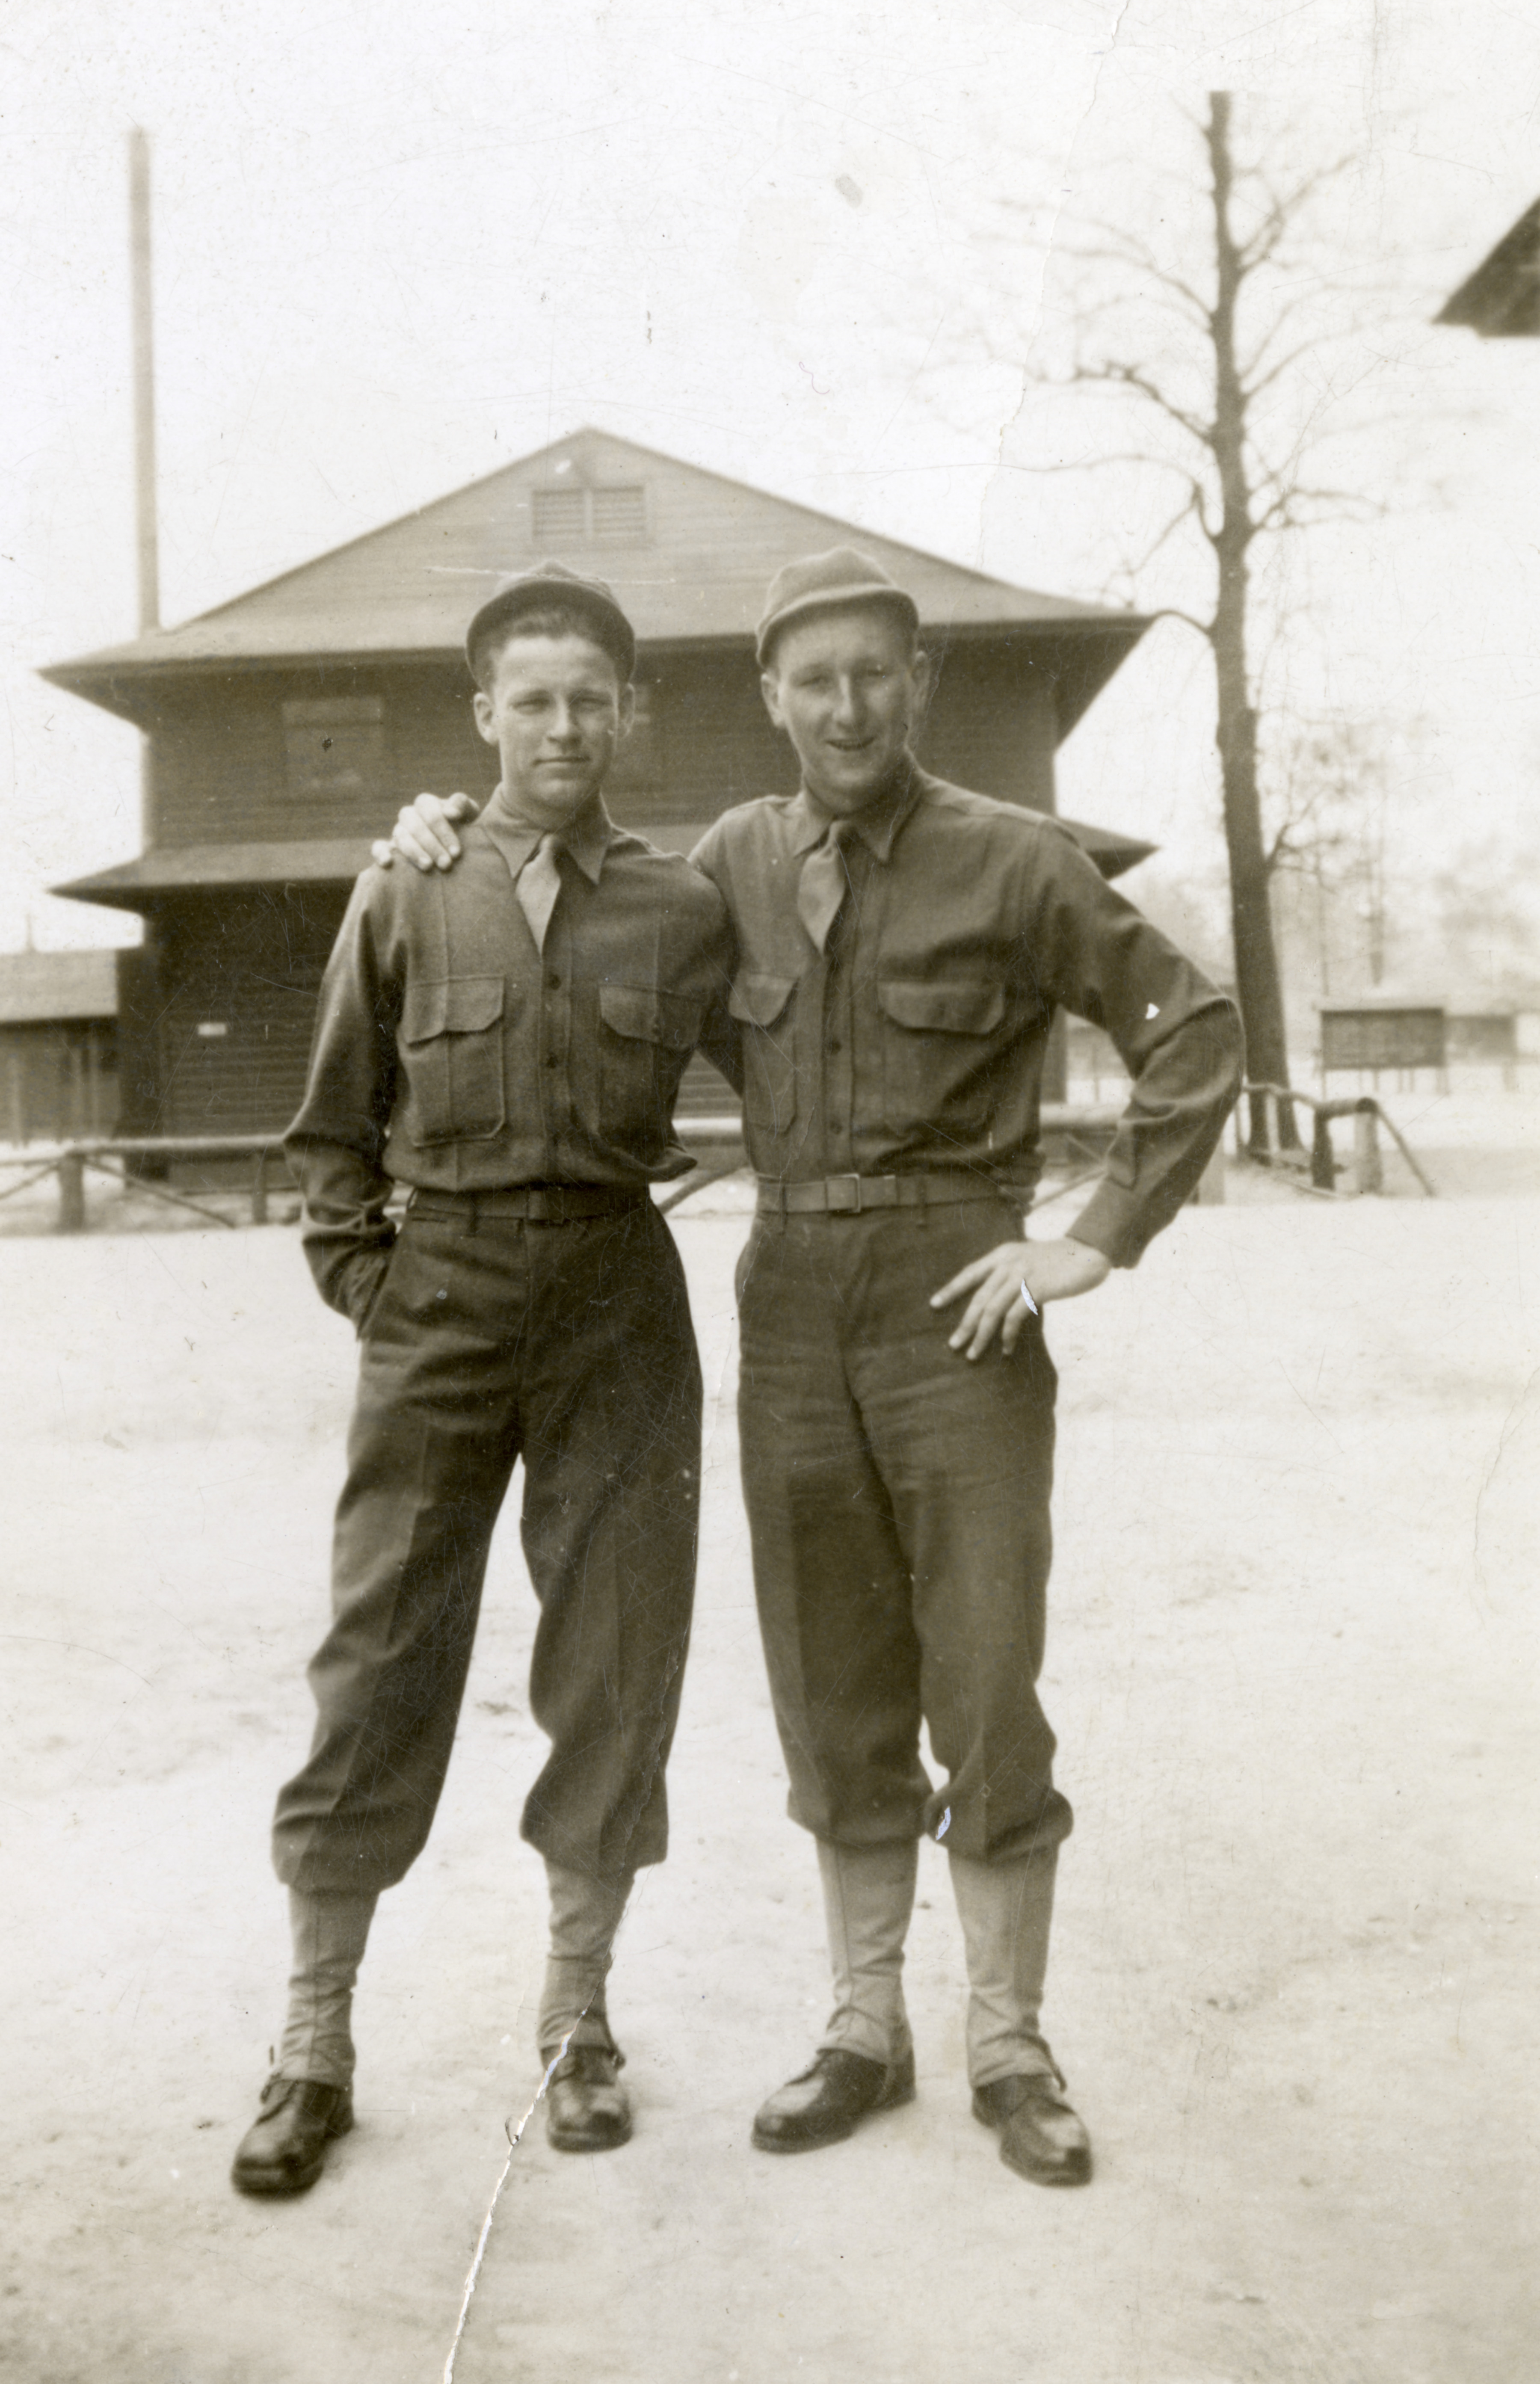 Two Army Air Force servicemen pose on campgrounds in the United States